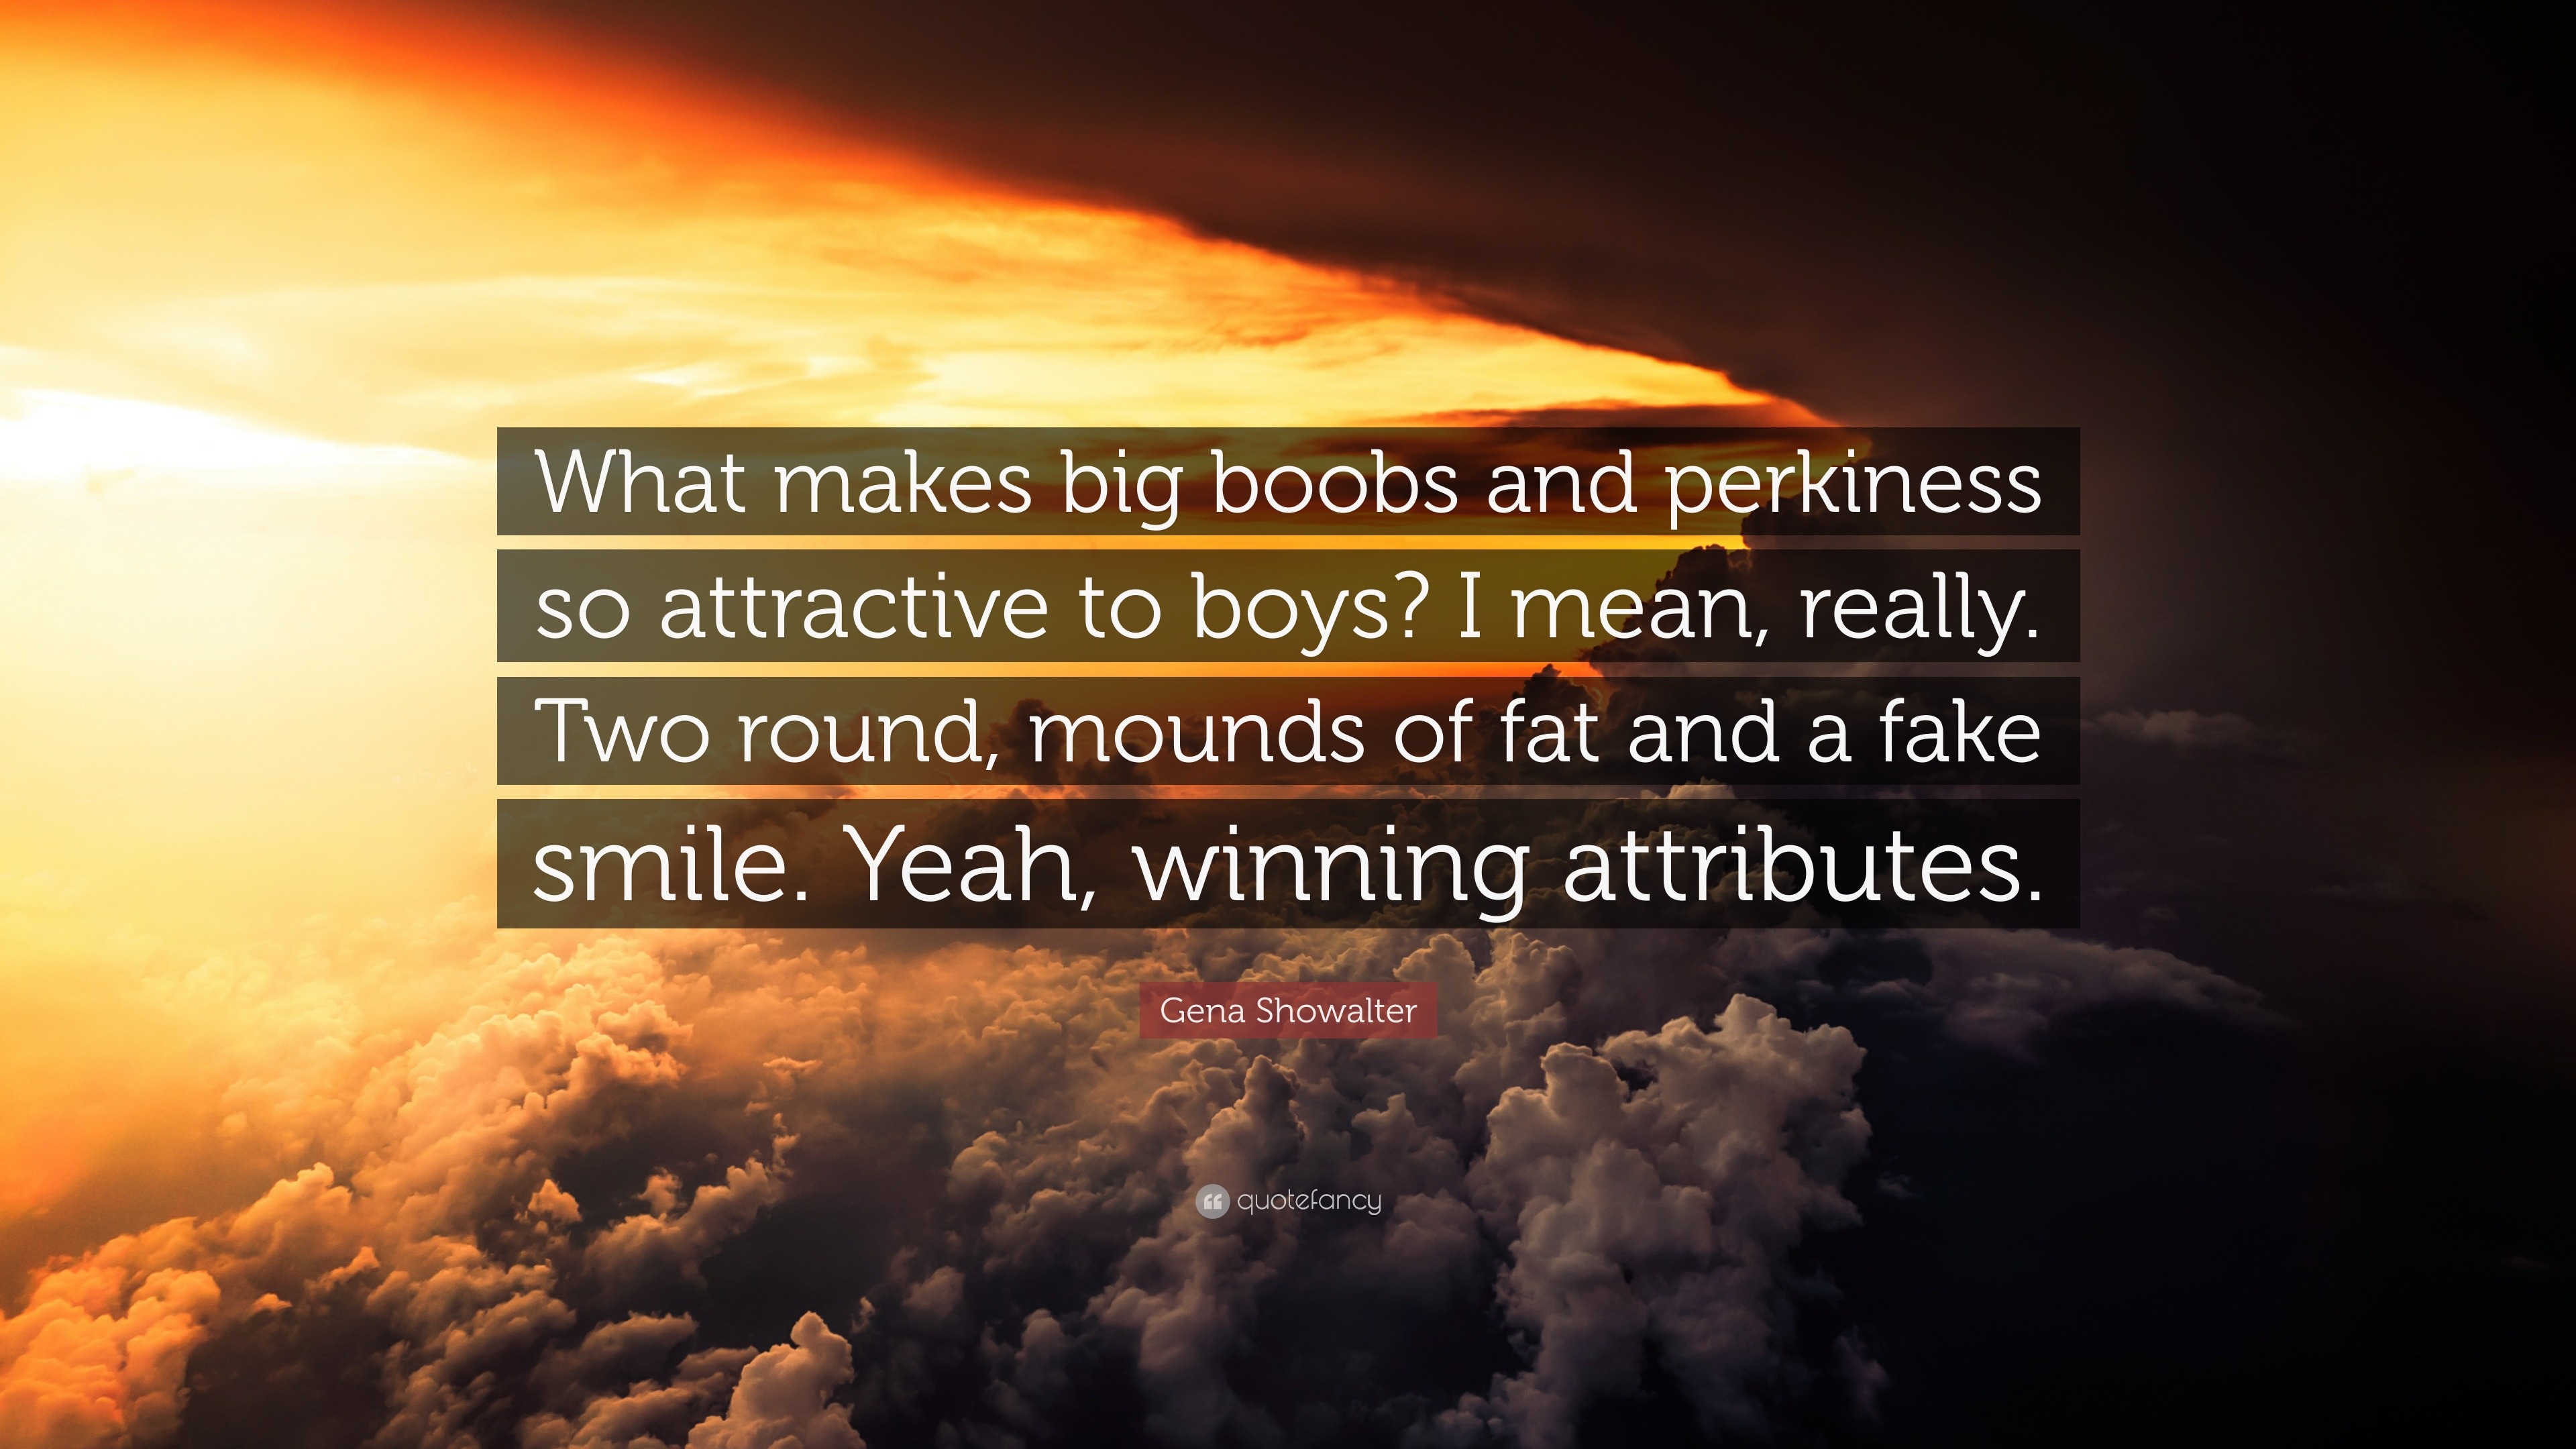 Gena Showalter quote: What makes big boobs and perkiness so attractive to  boys